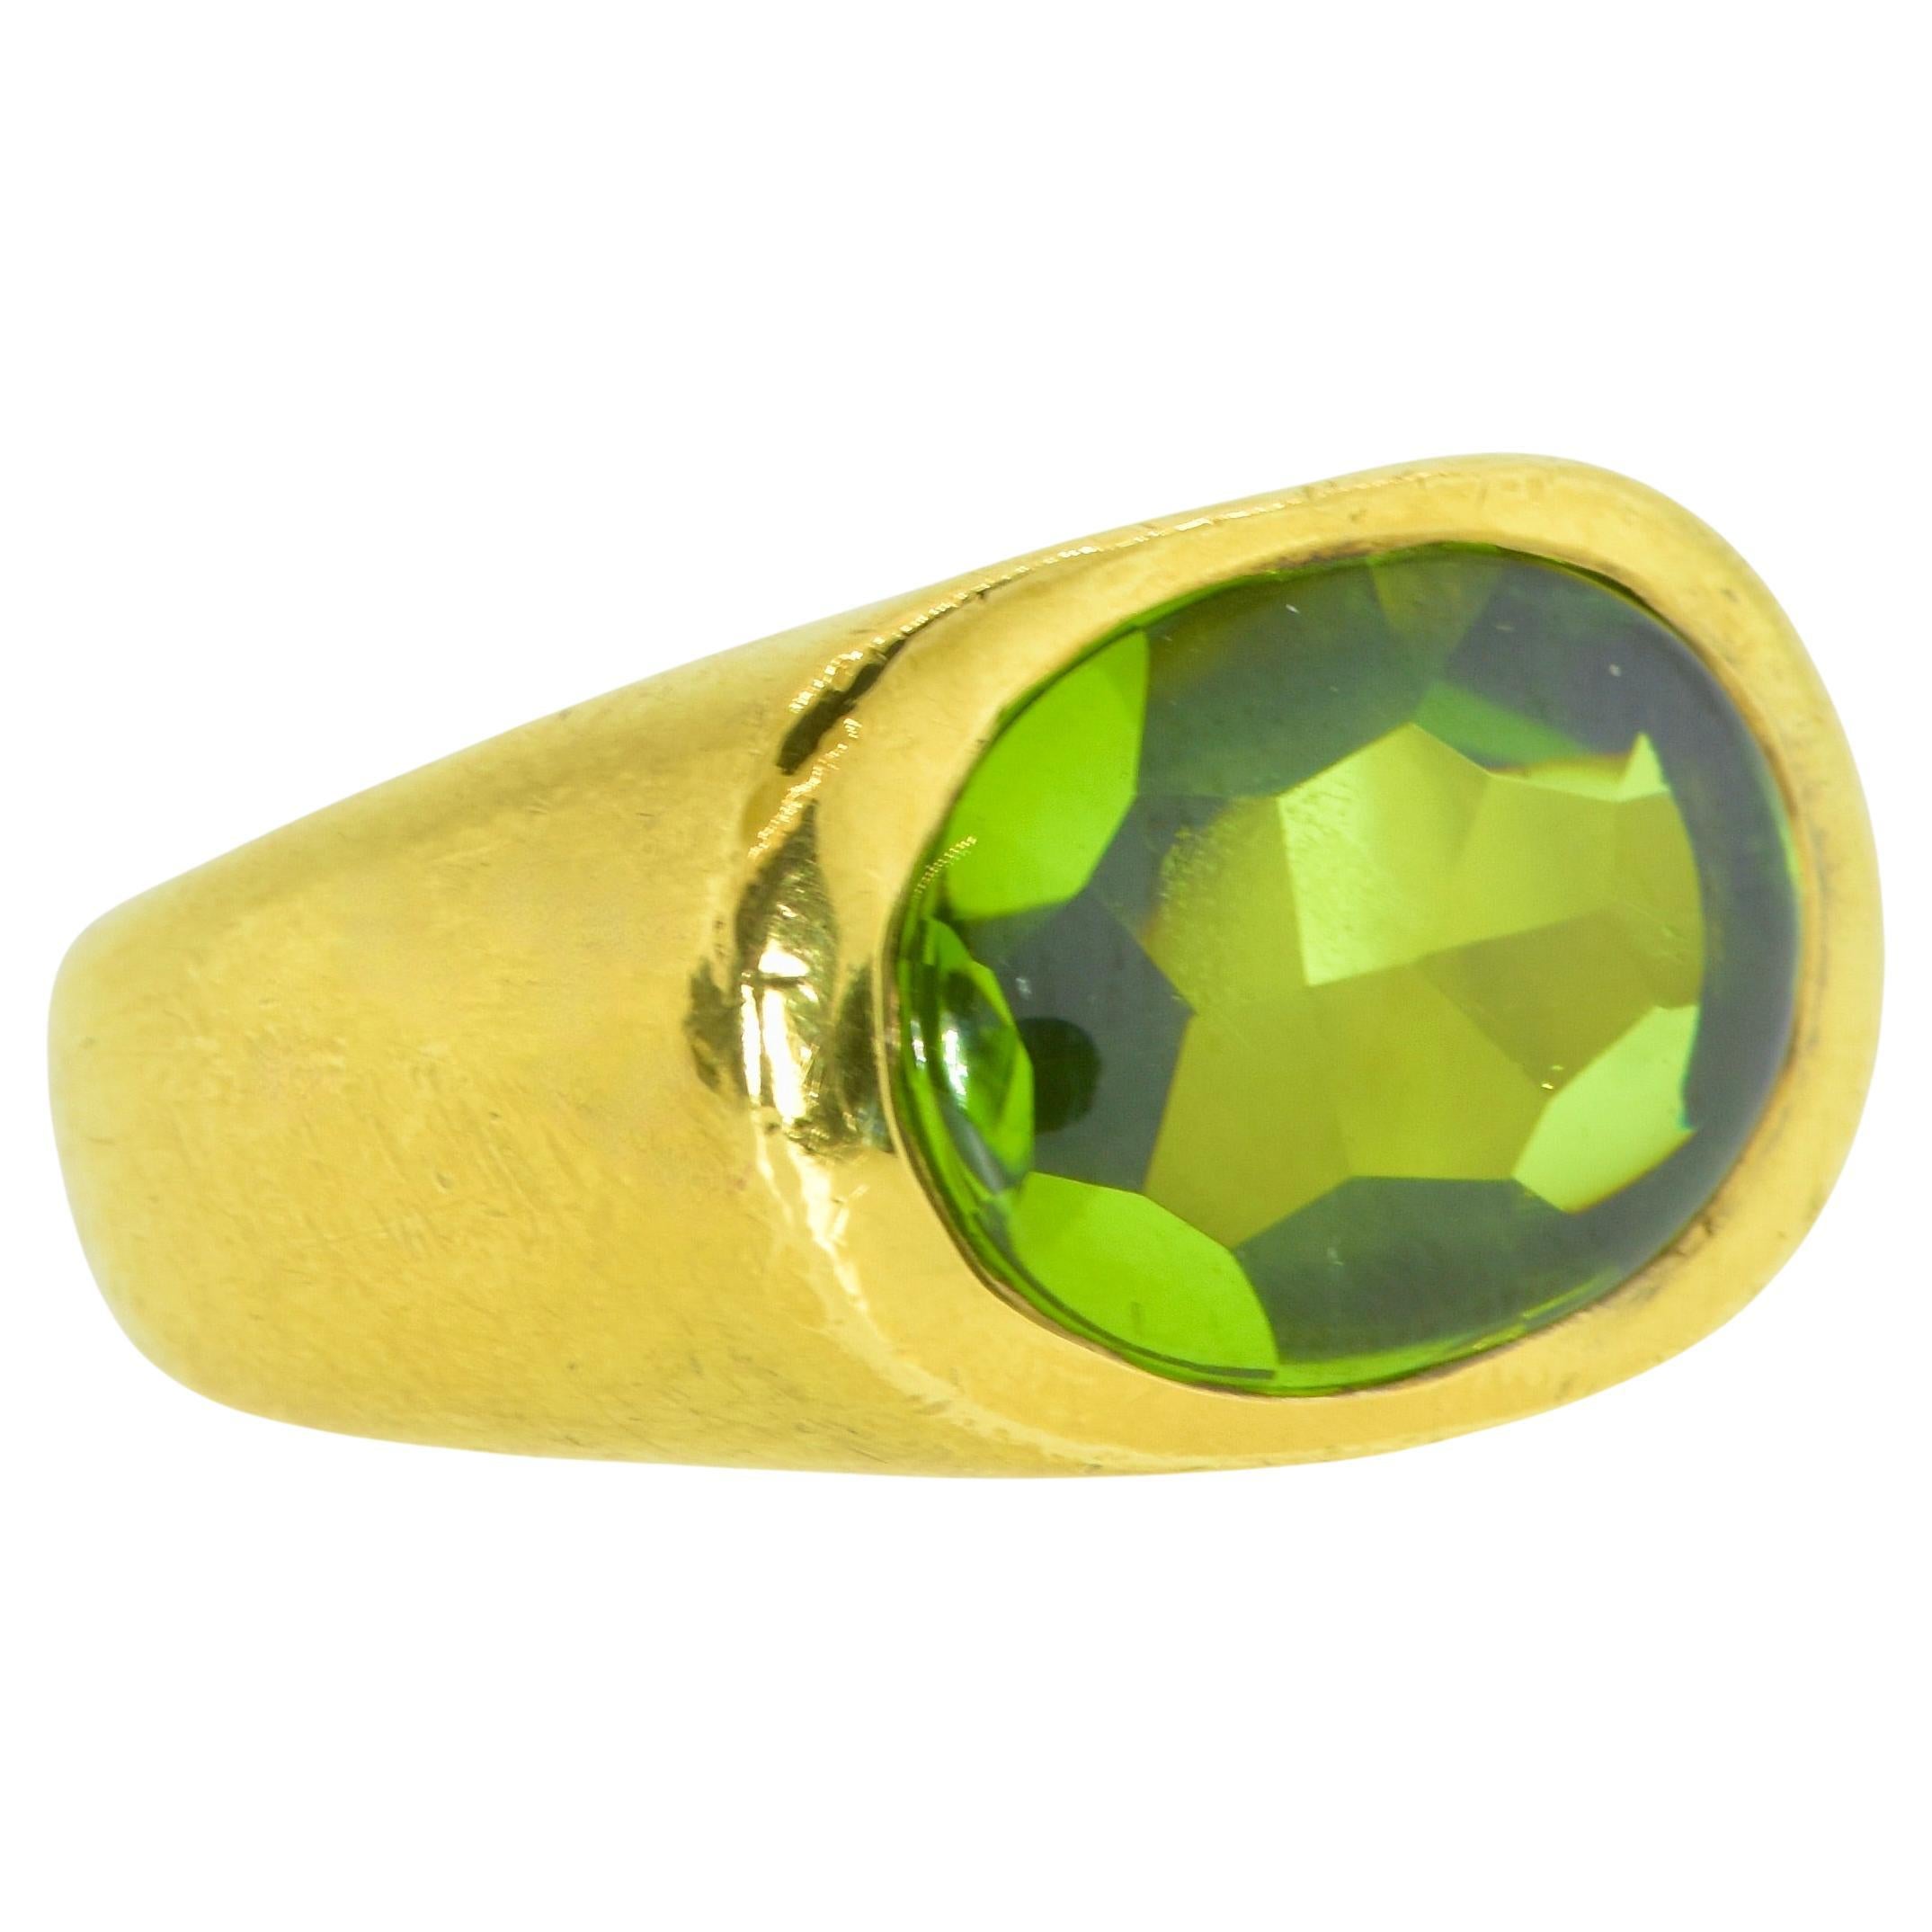  Peridot 8 cts., Very Fine Quality set in an 18K Yellow Gold Vintage Ring